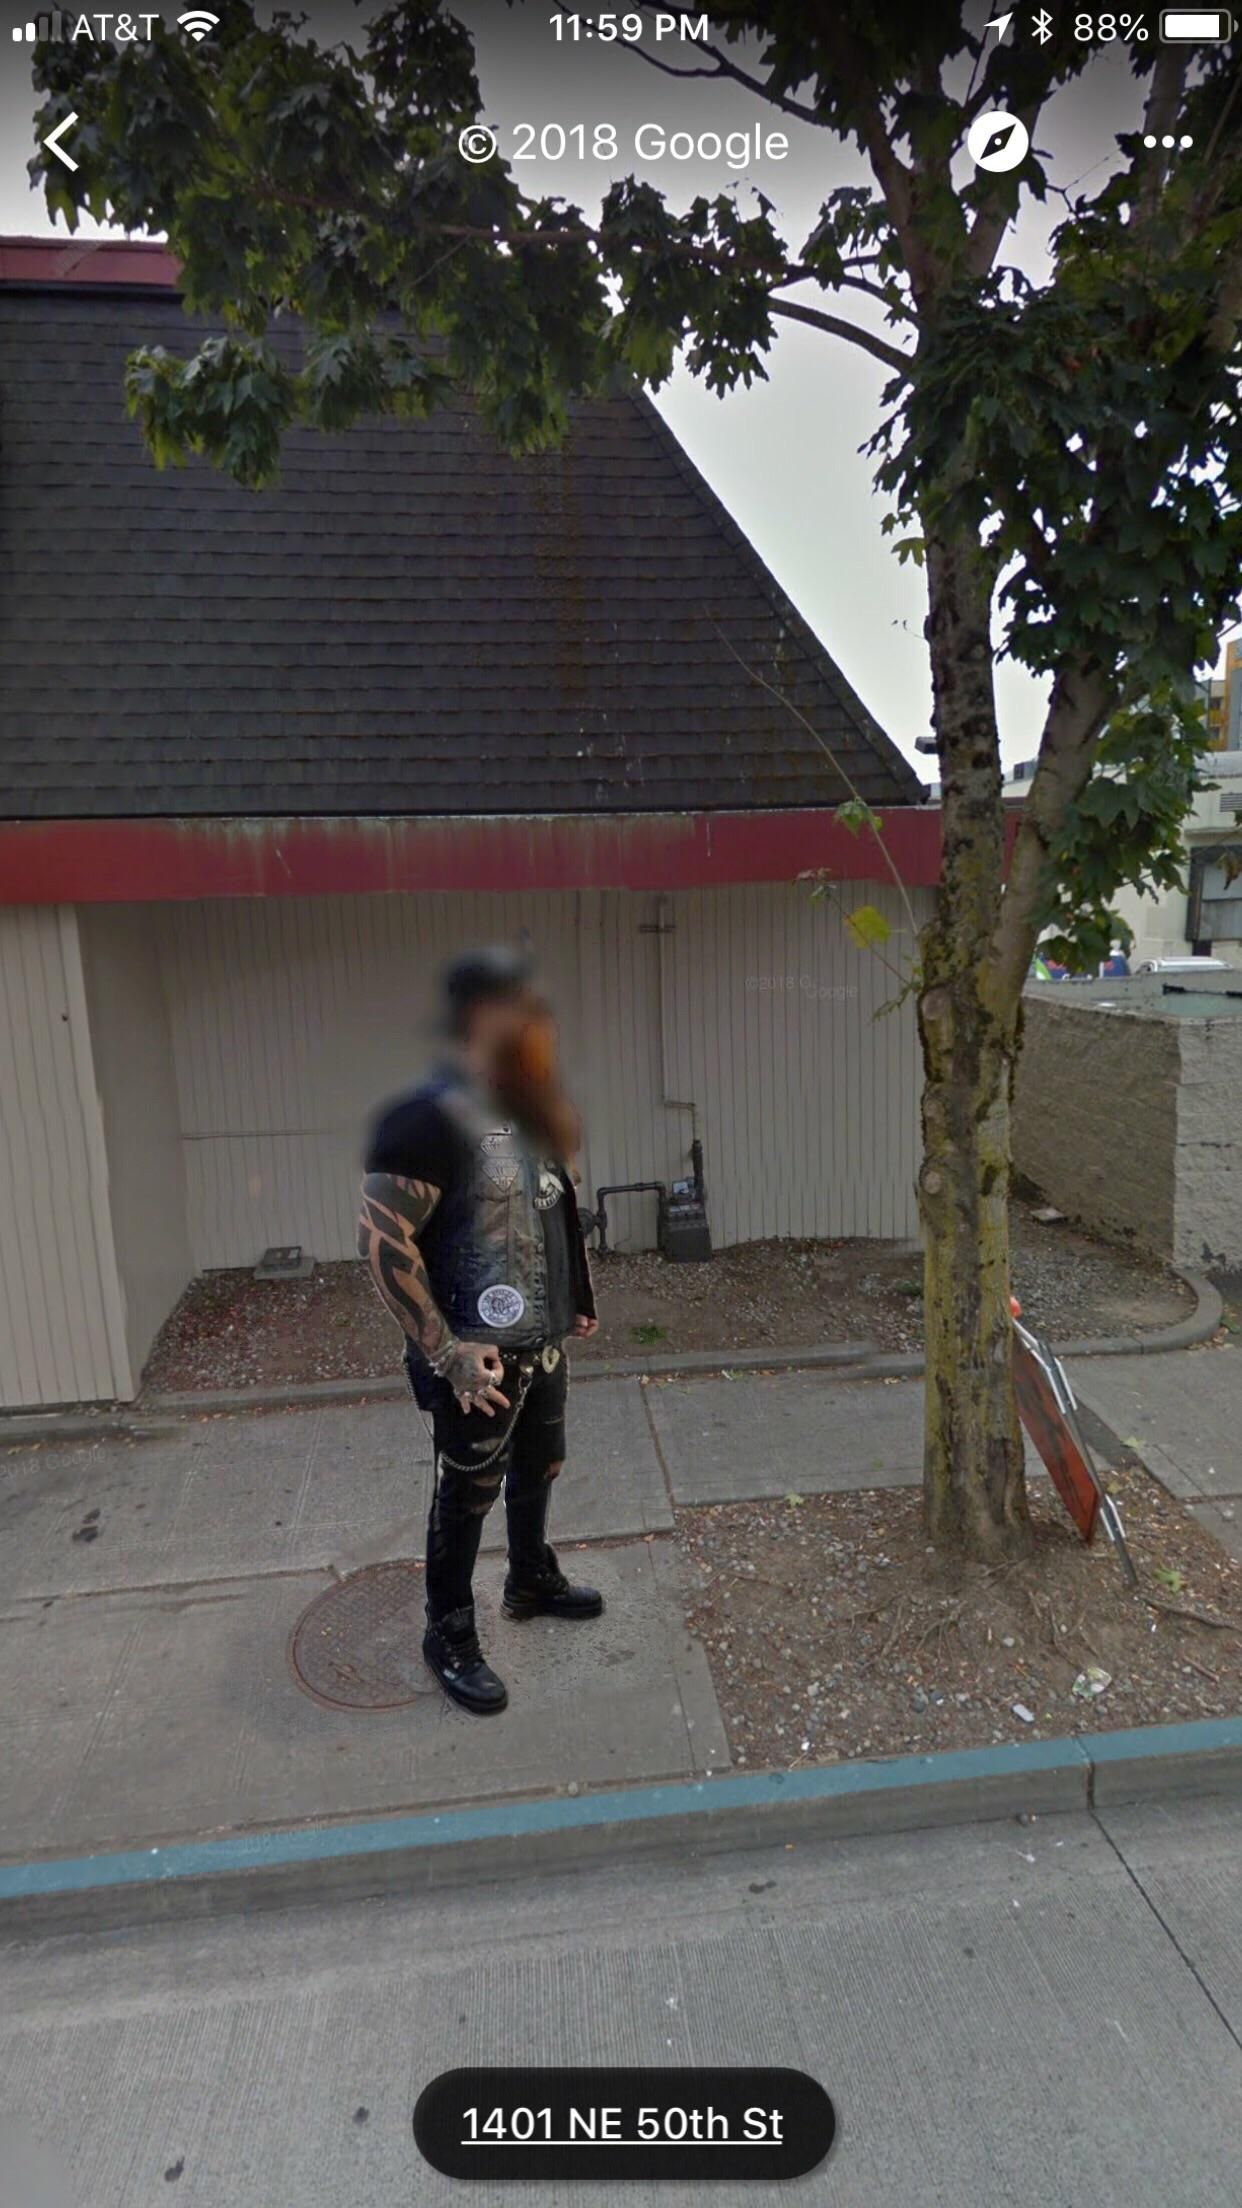 When you’re on Google Maps and think: “That son of a *** got me.”